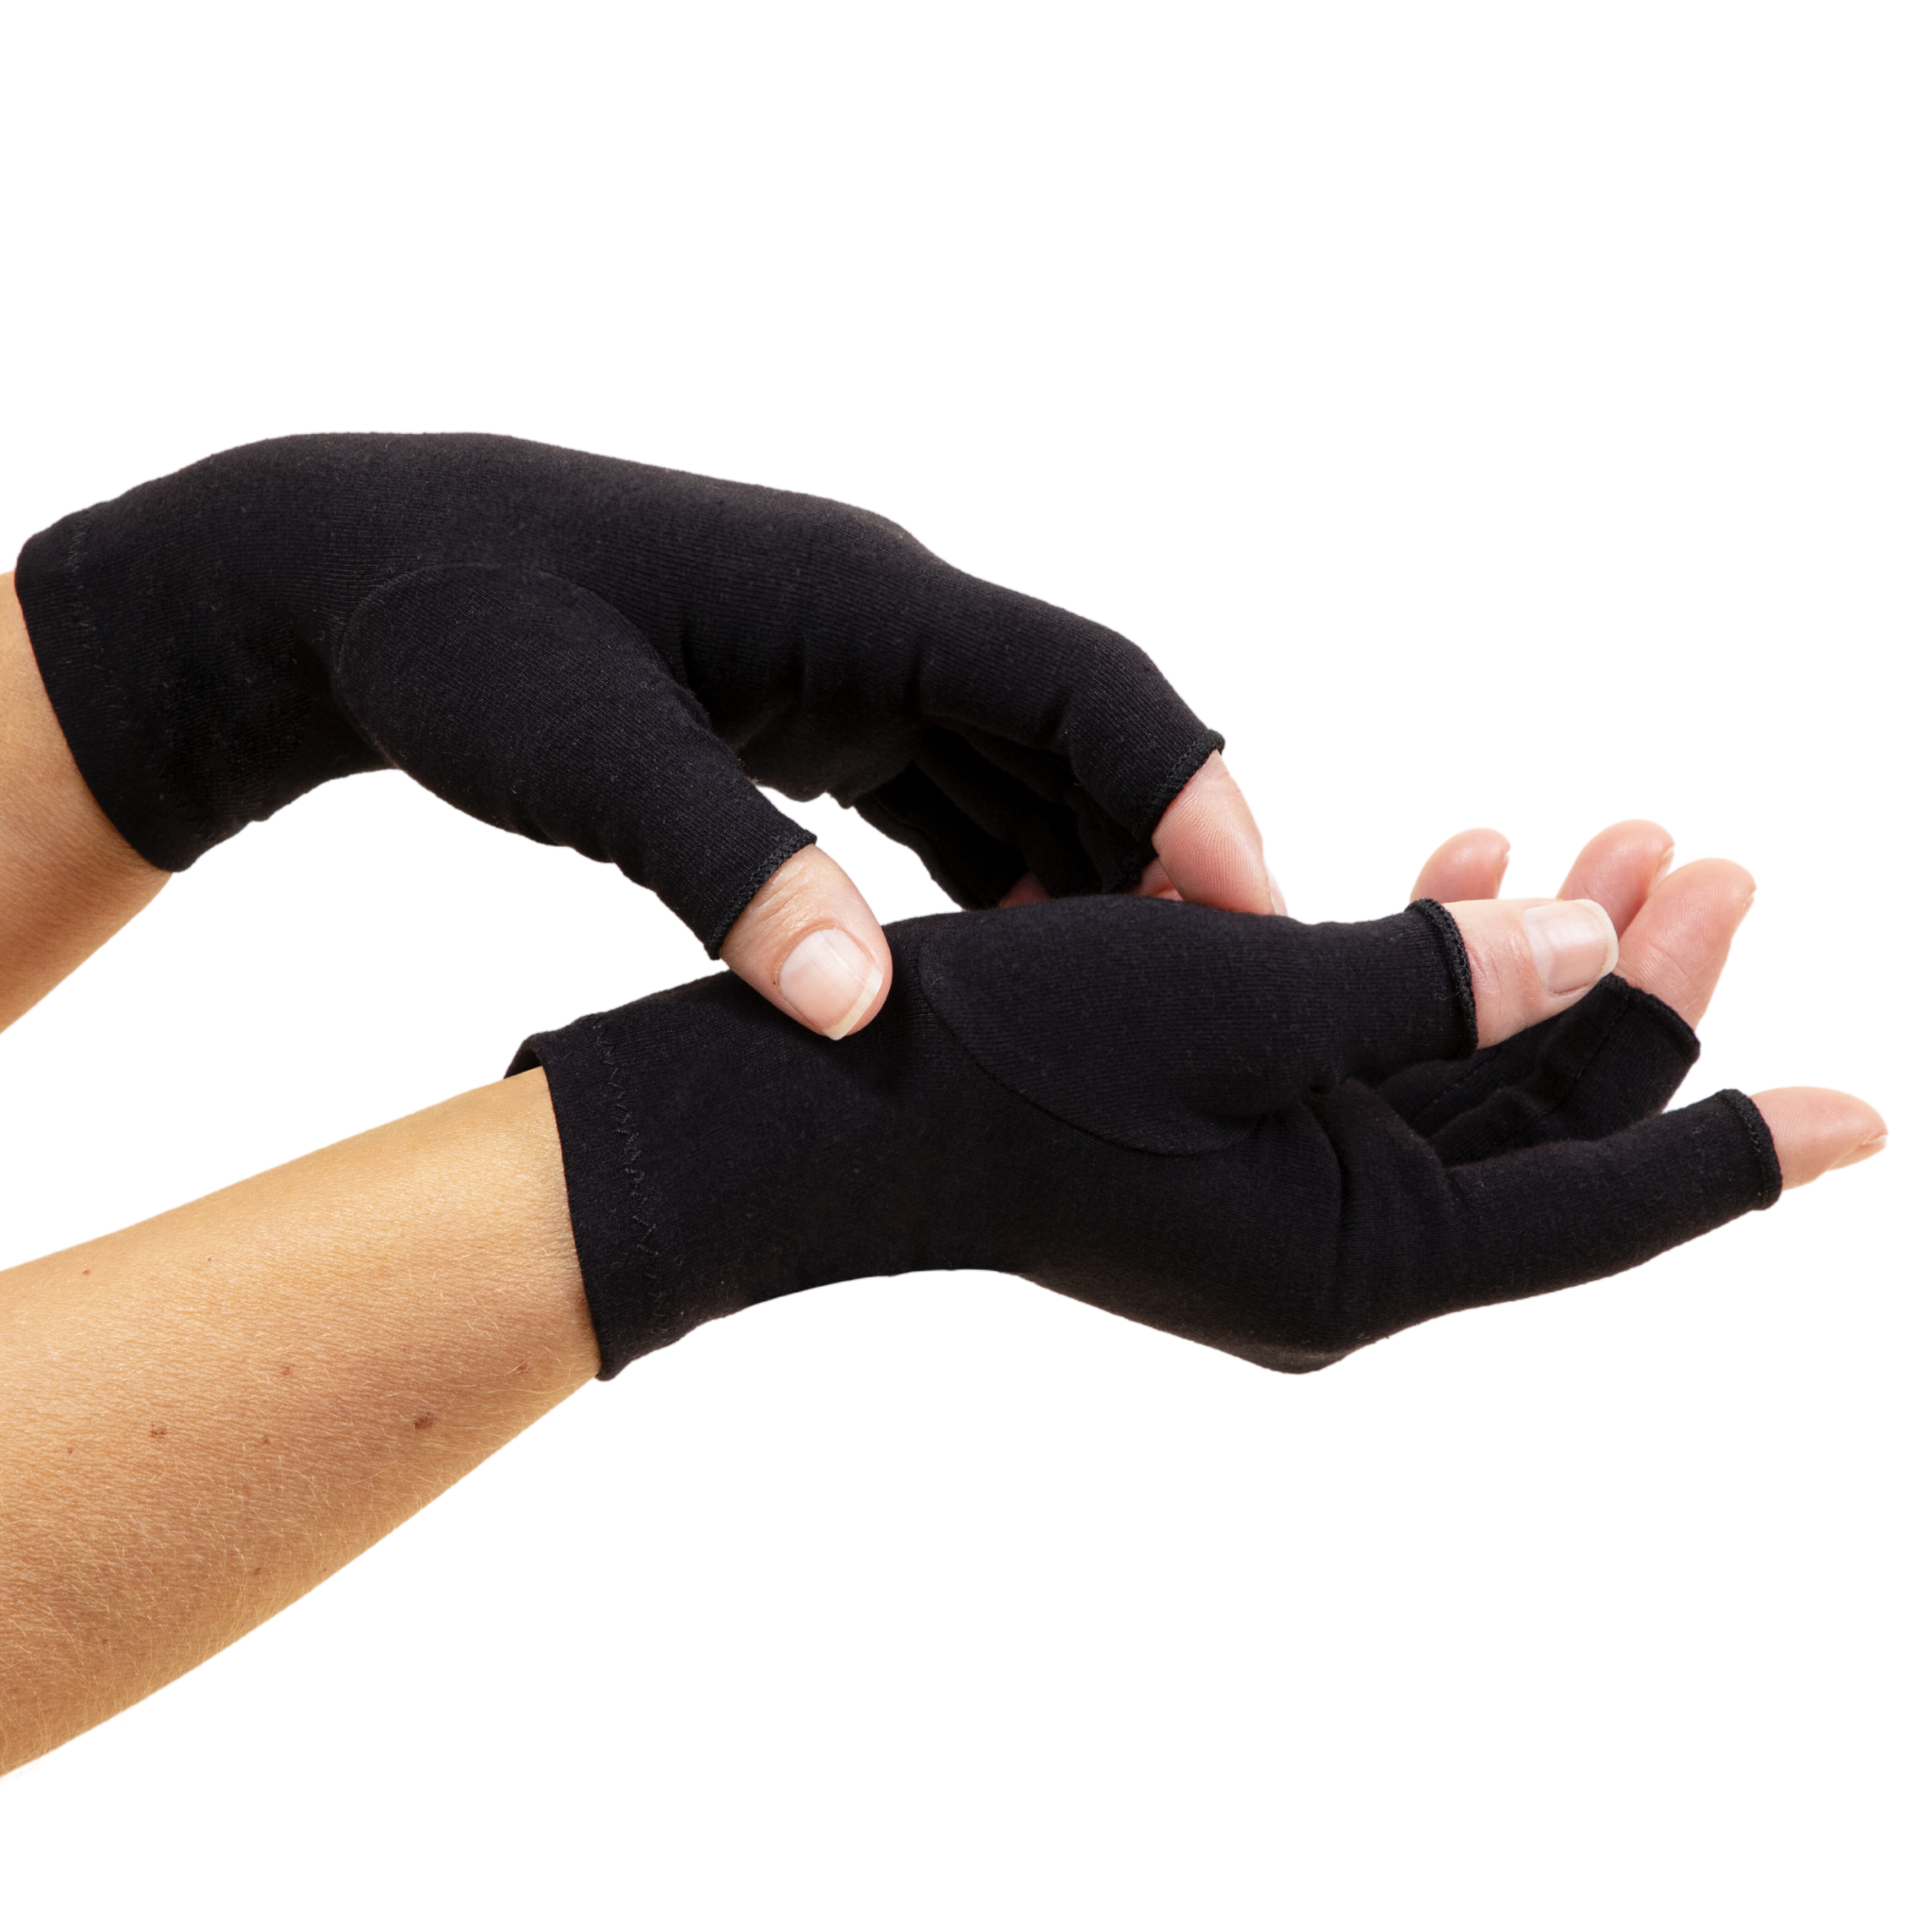 A close-up of hands of a woman with arthritis, wearing Classic Black Compression Gloves. One hand is positioned palm up, while the other hand touches it from above. The background is white.